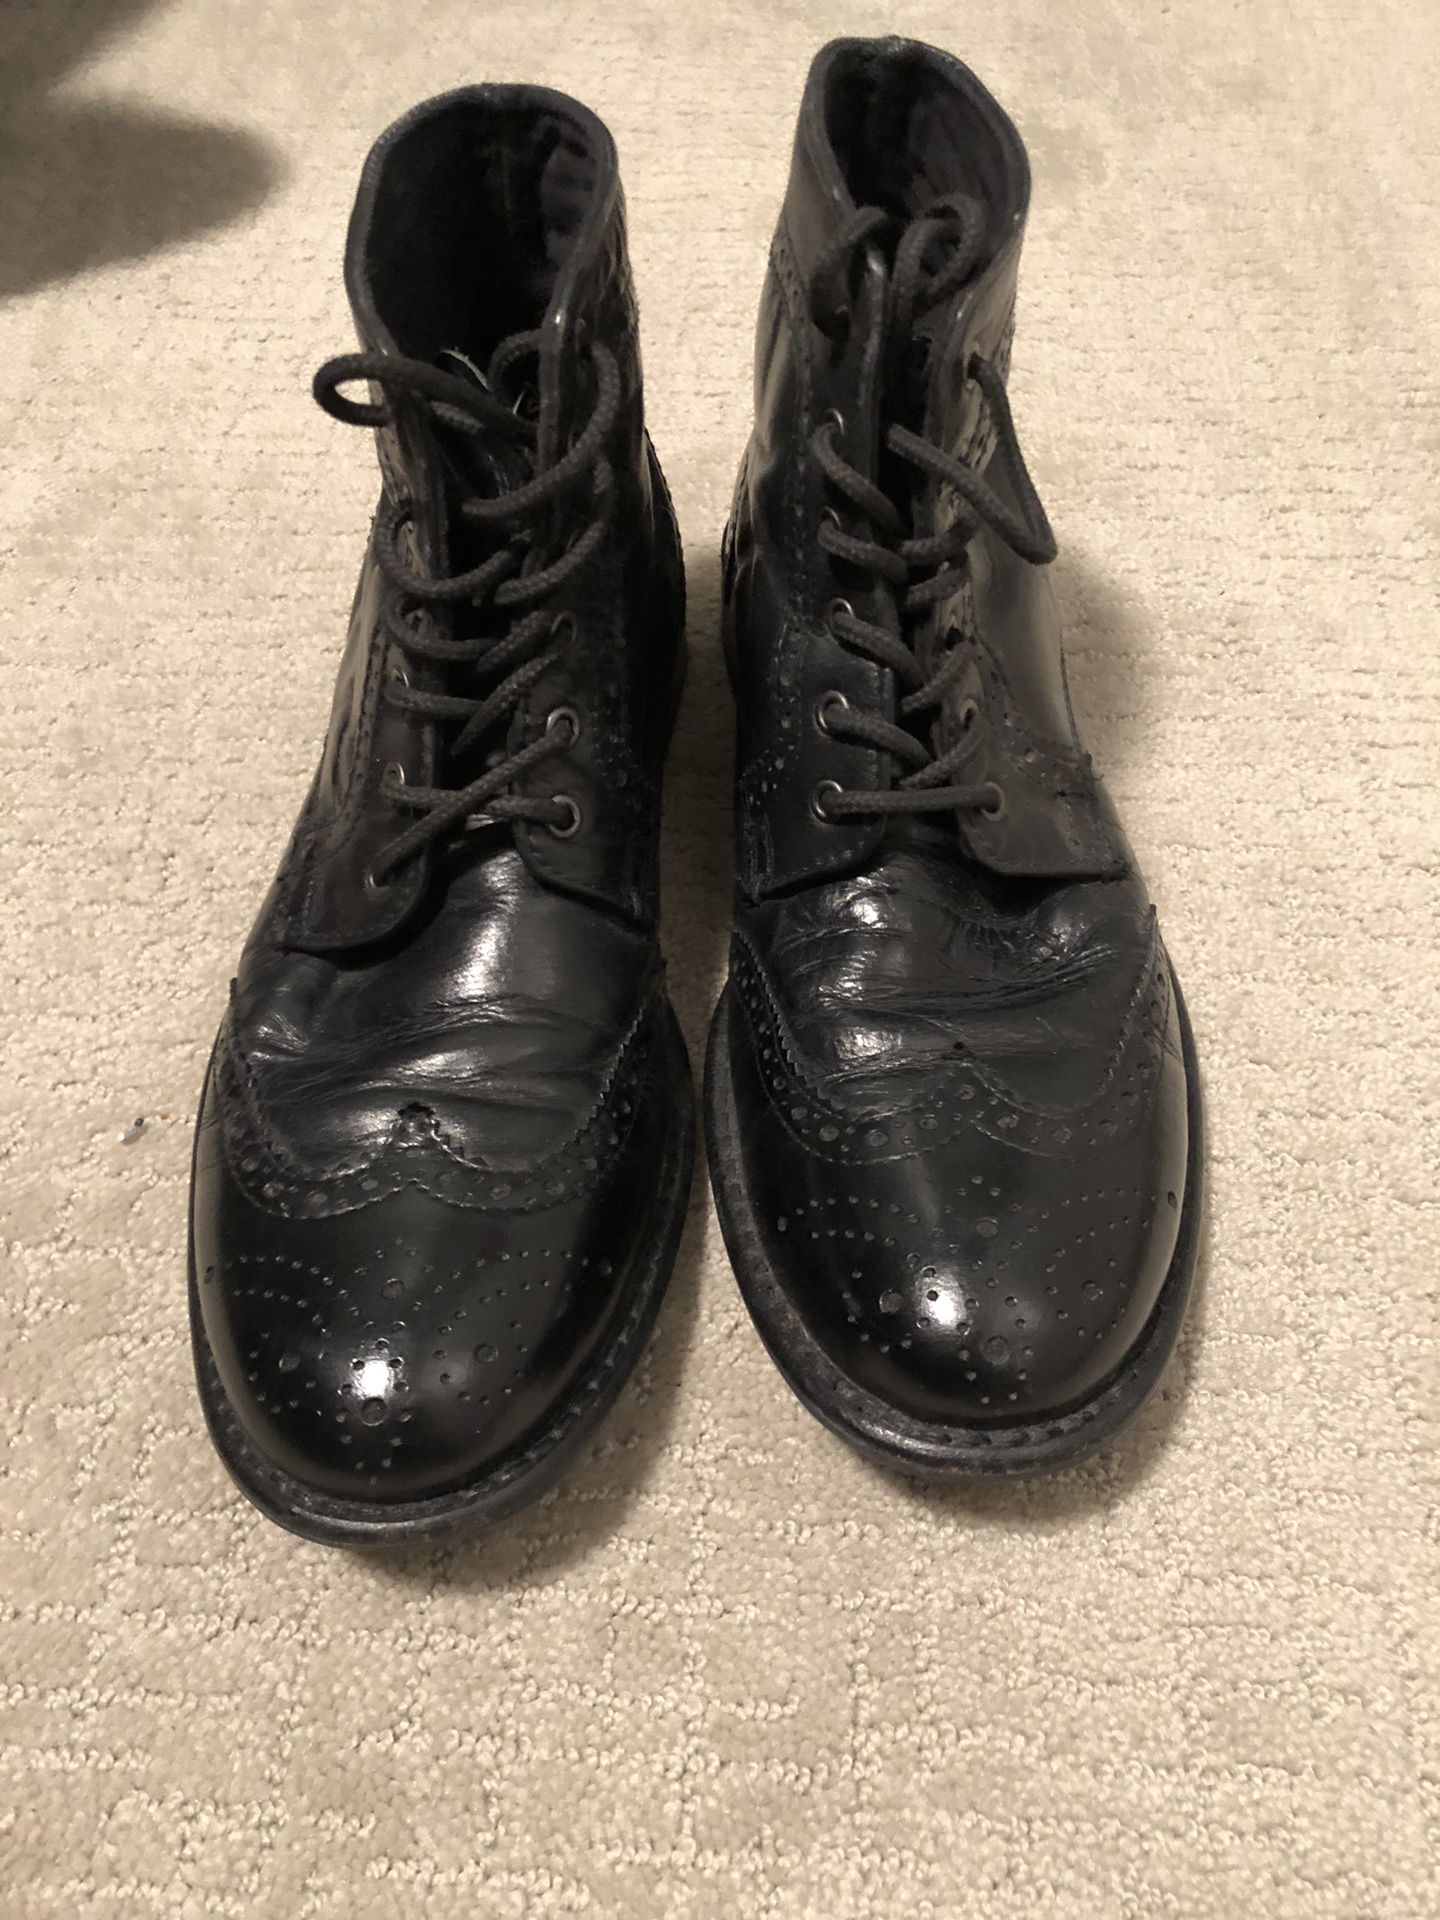 Men’s size 8 Brogue/Wing tip boots